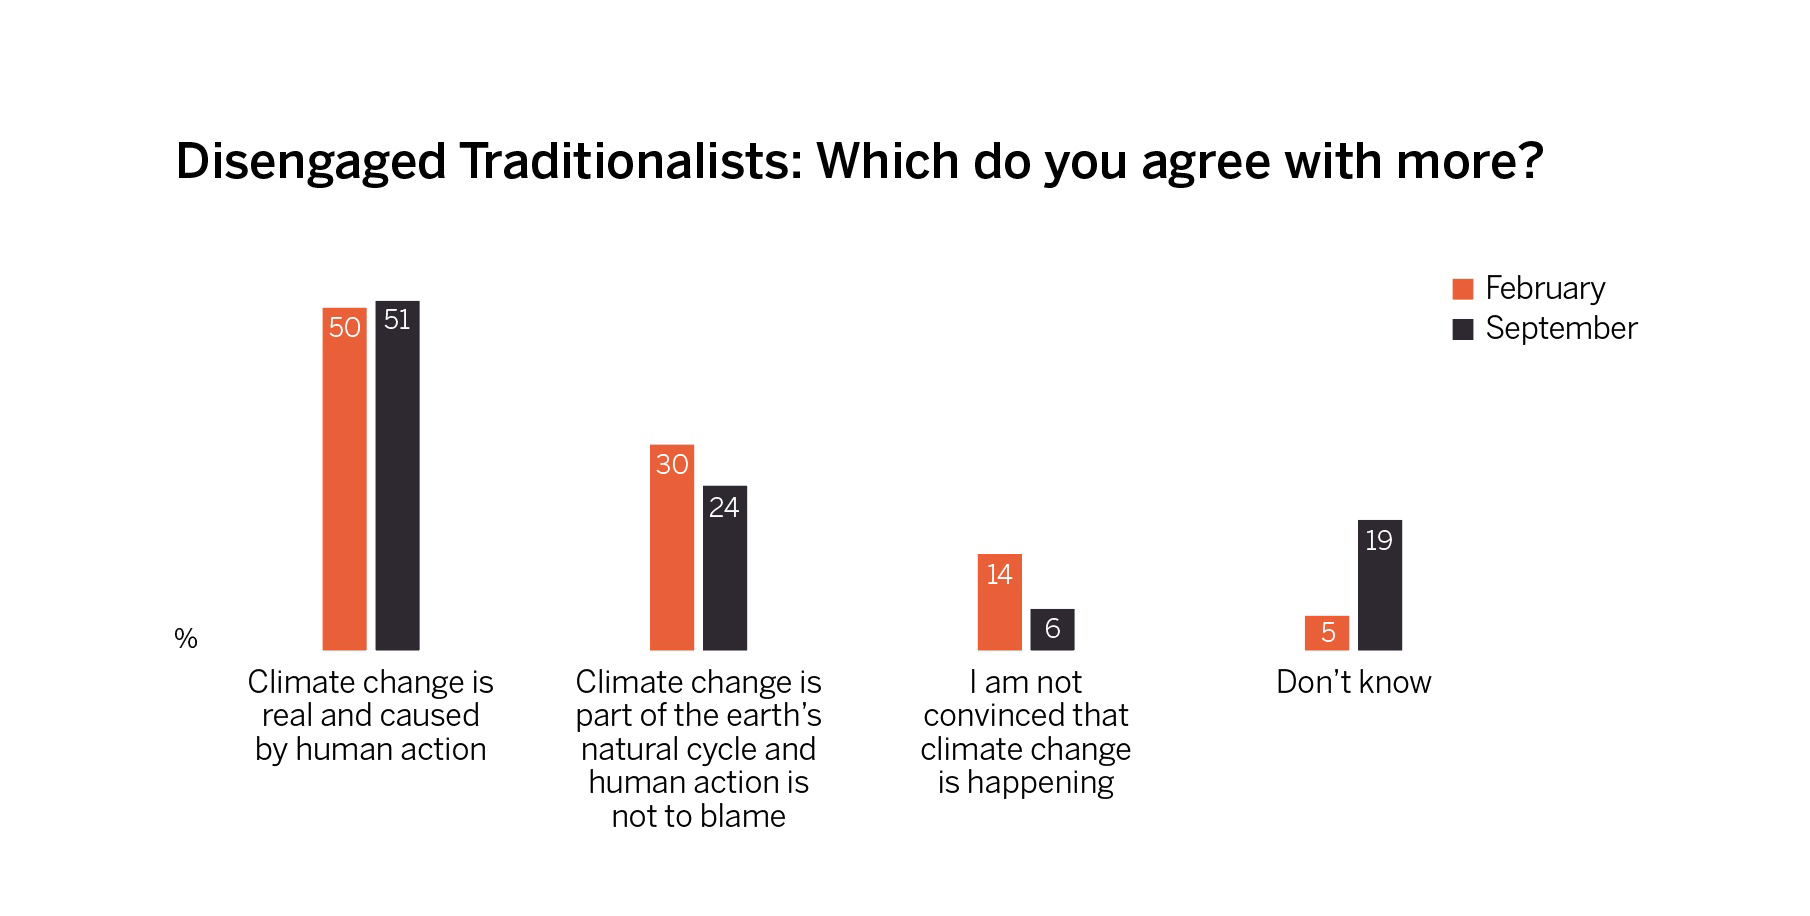 Disengaged Traditionalists’ understanding of causes of climate change, in February and September